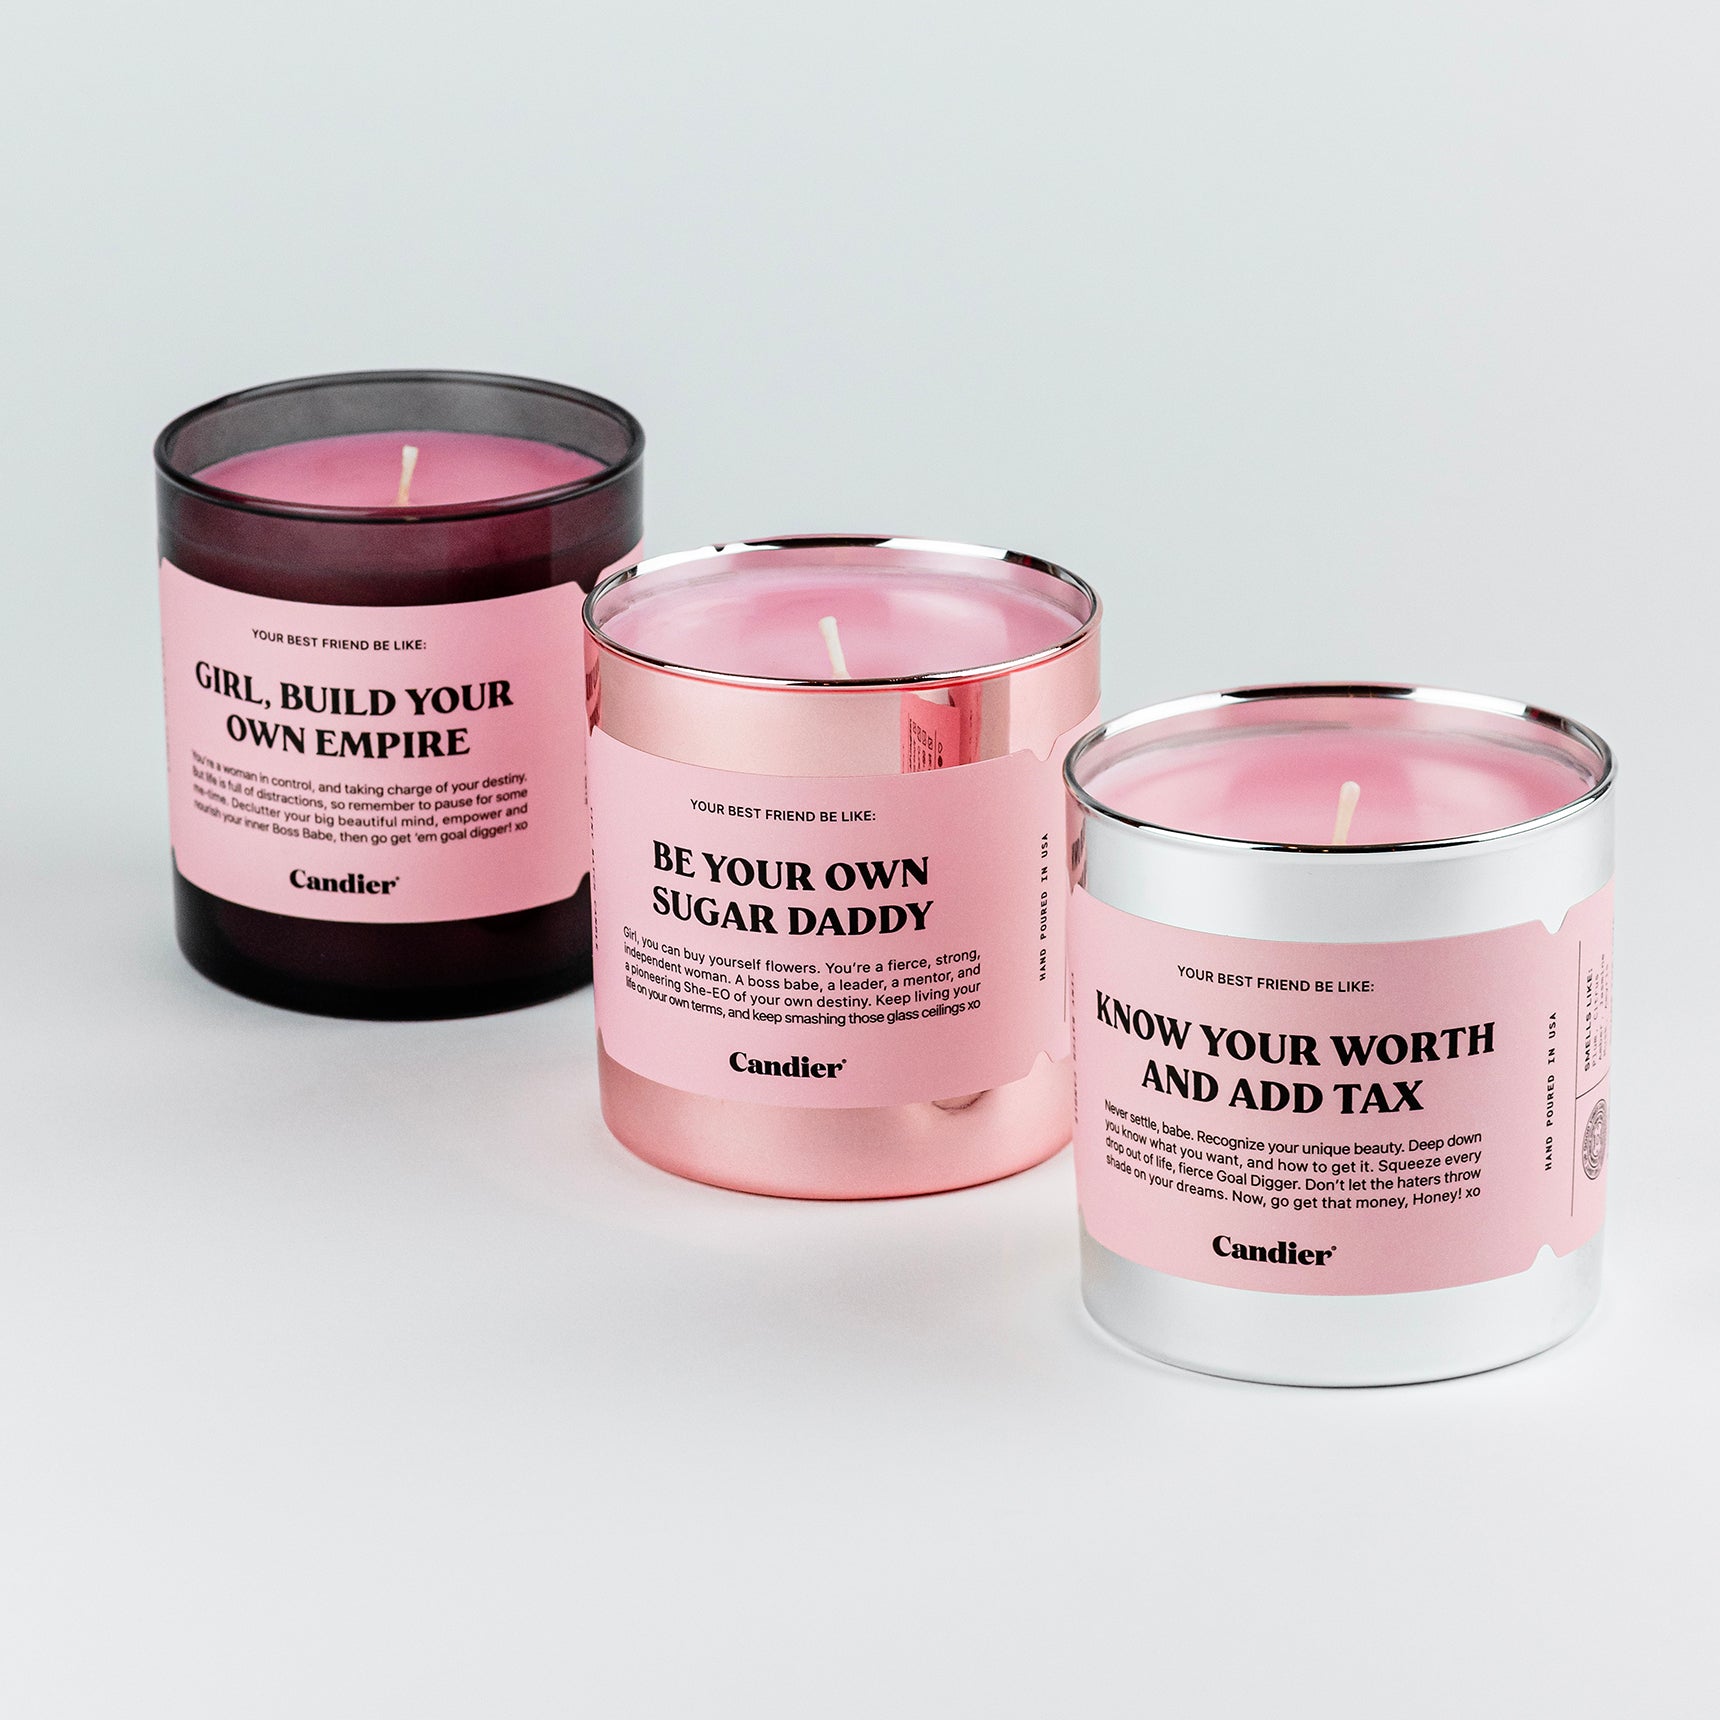 three girl power themed candles with empowering female messaging